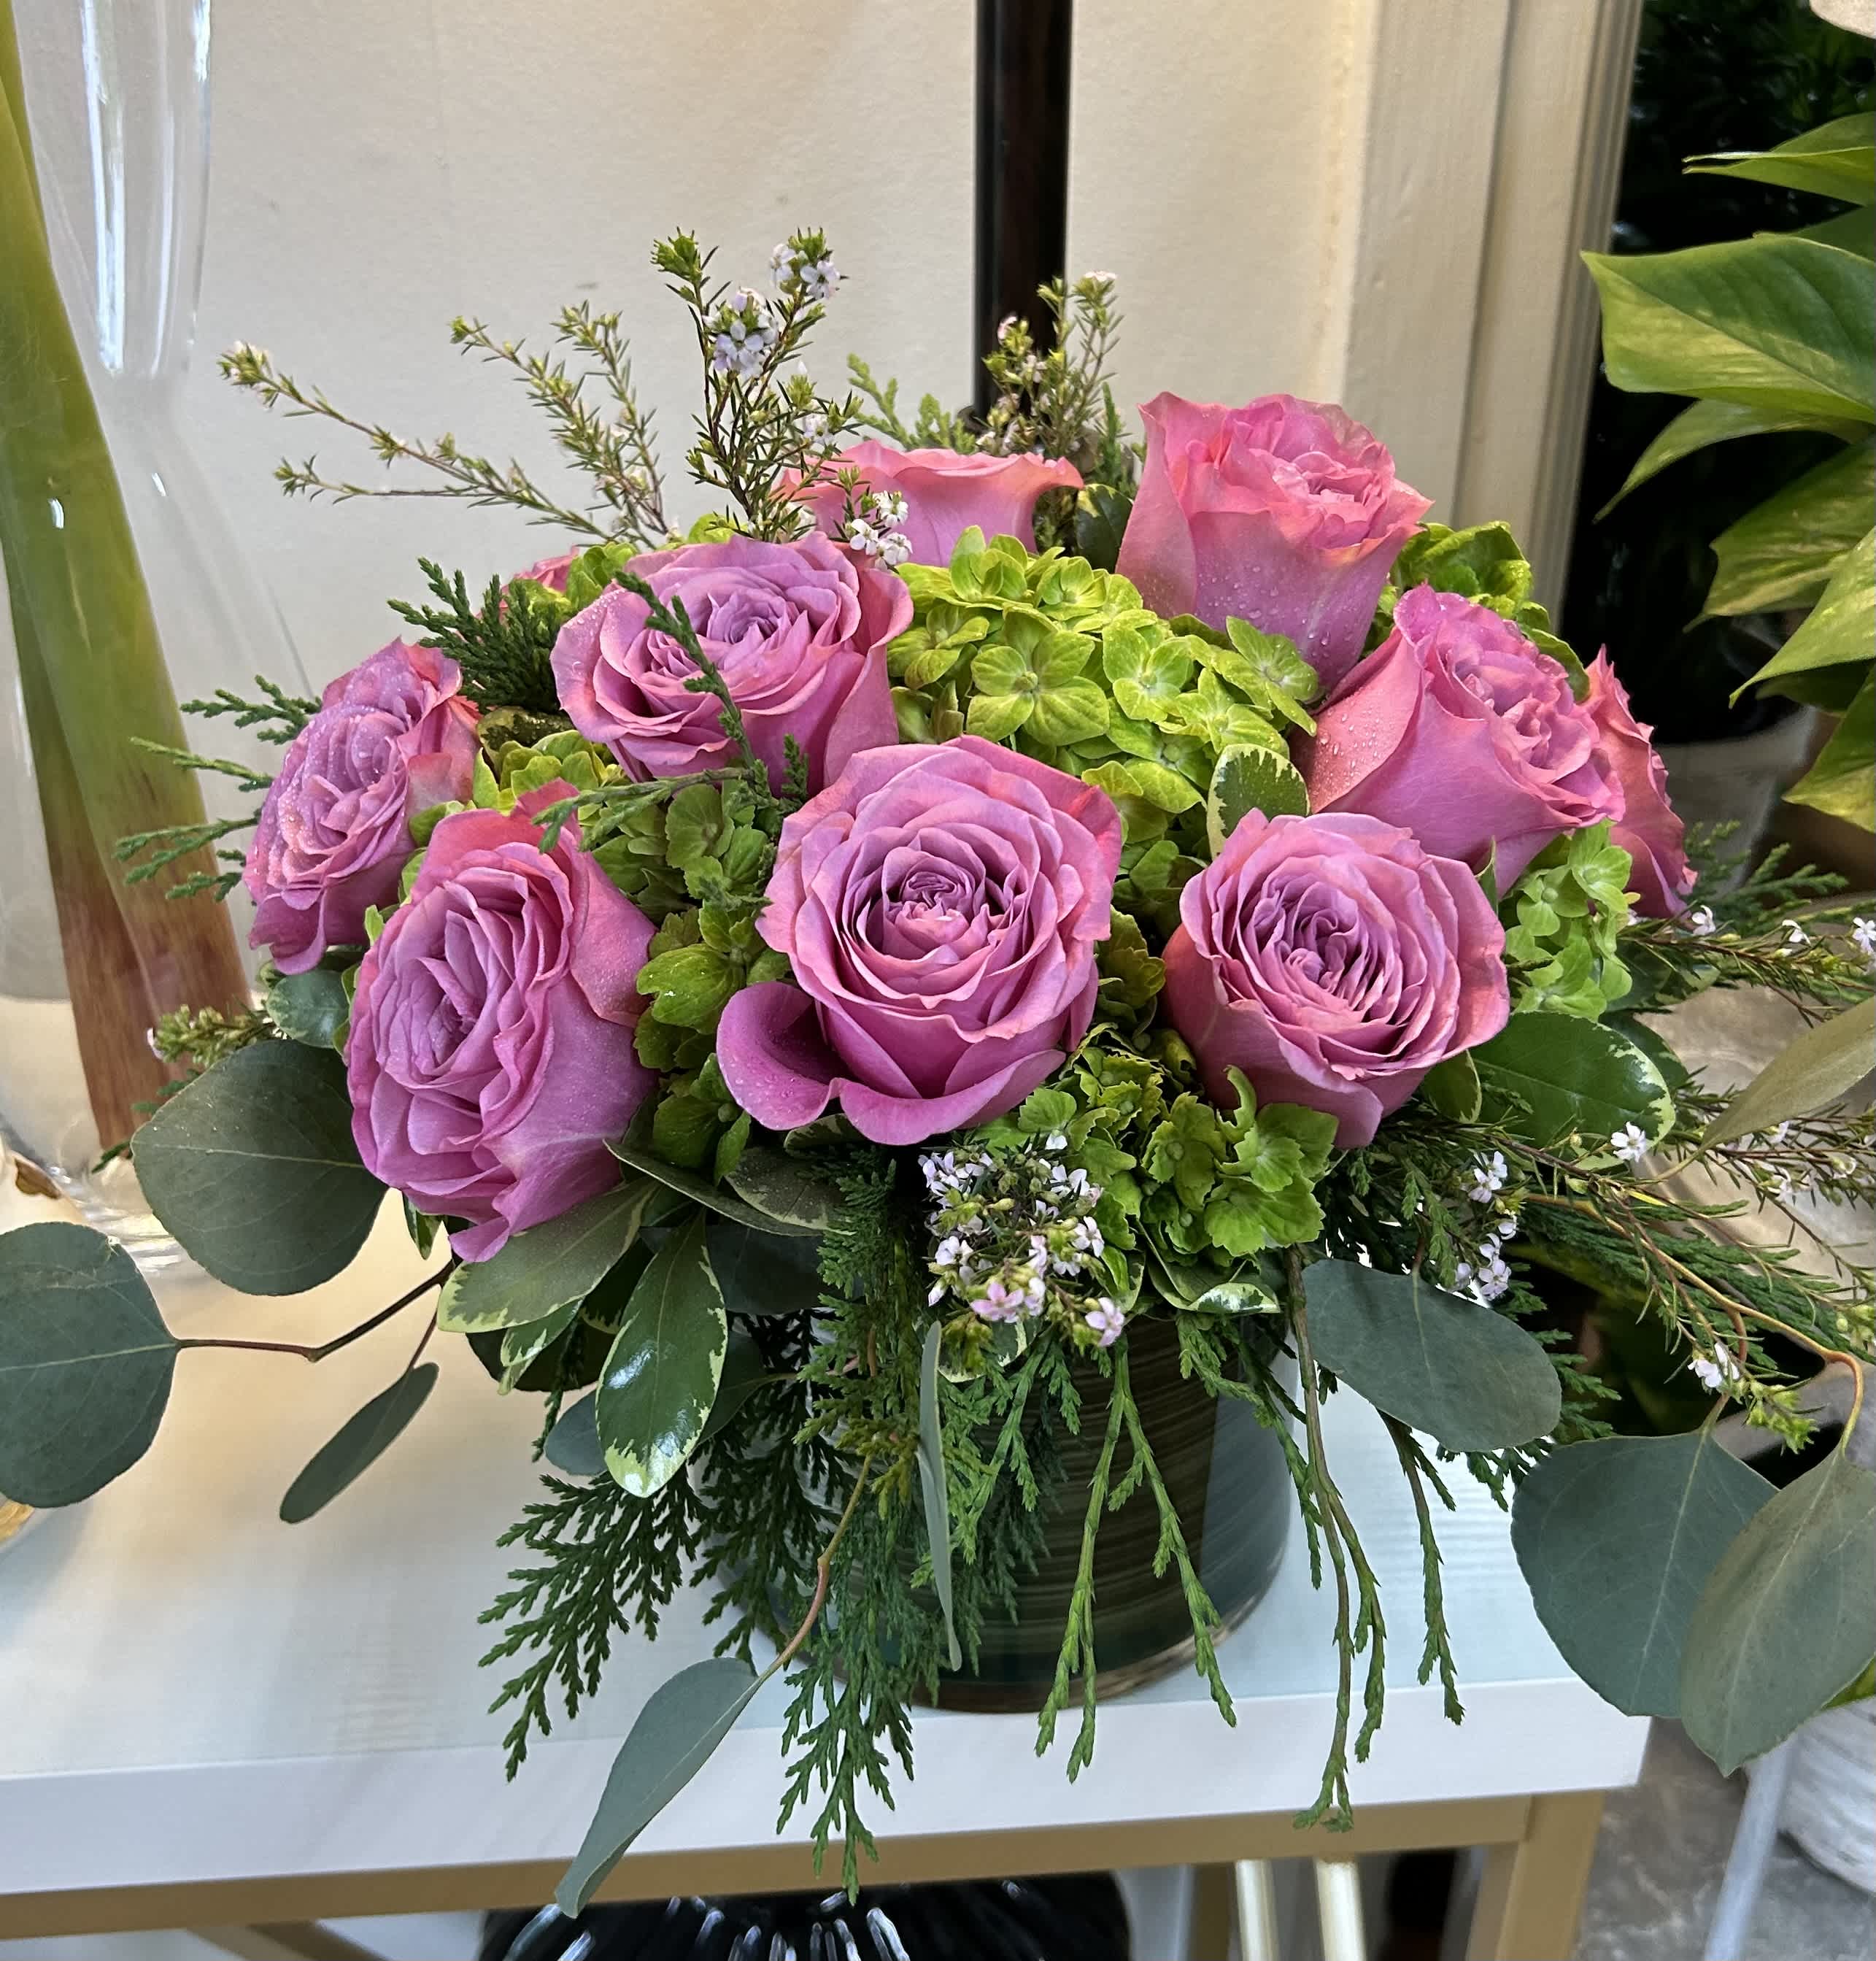 The lavender love bouquet - Lavender roses and green hydrangeas